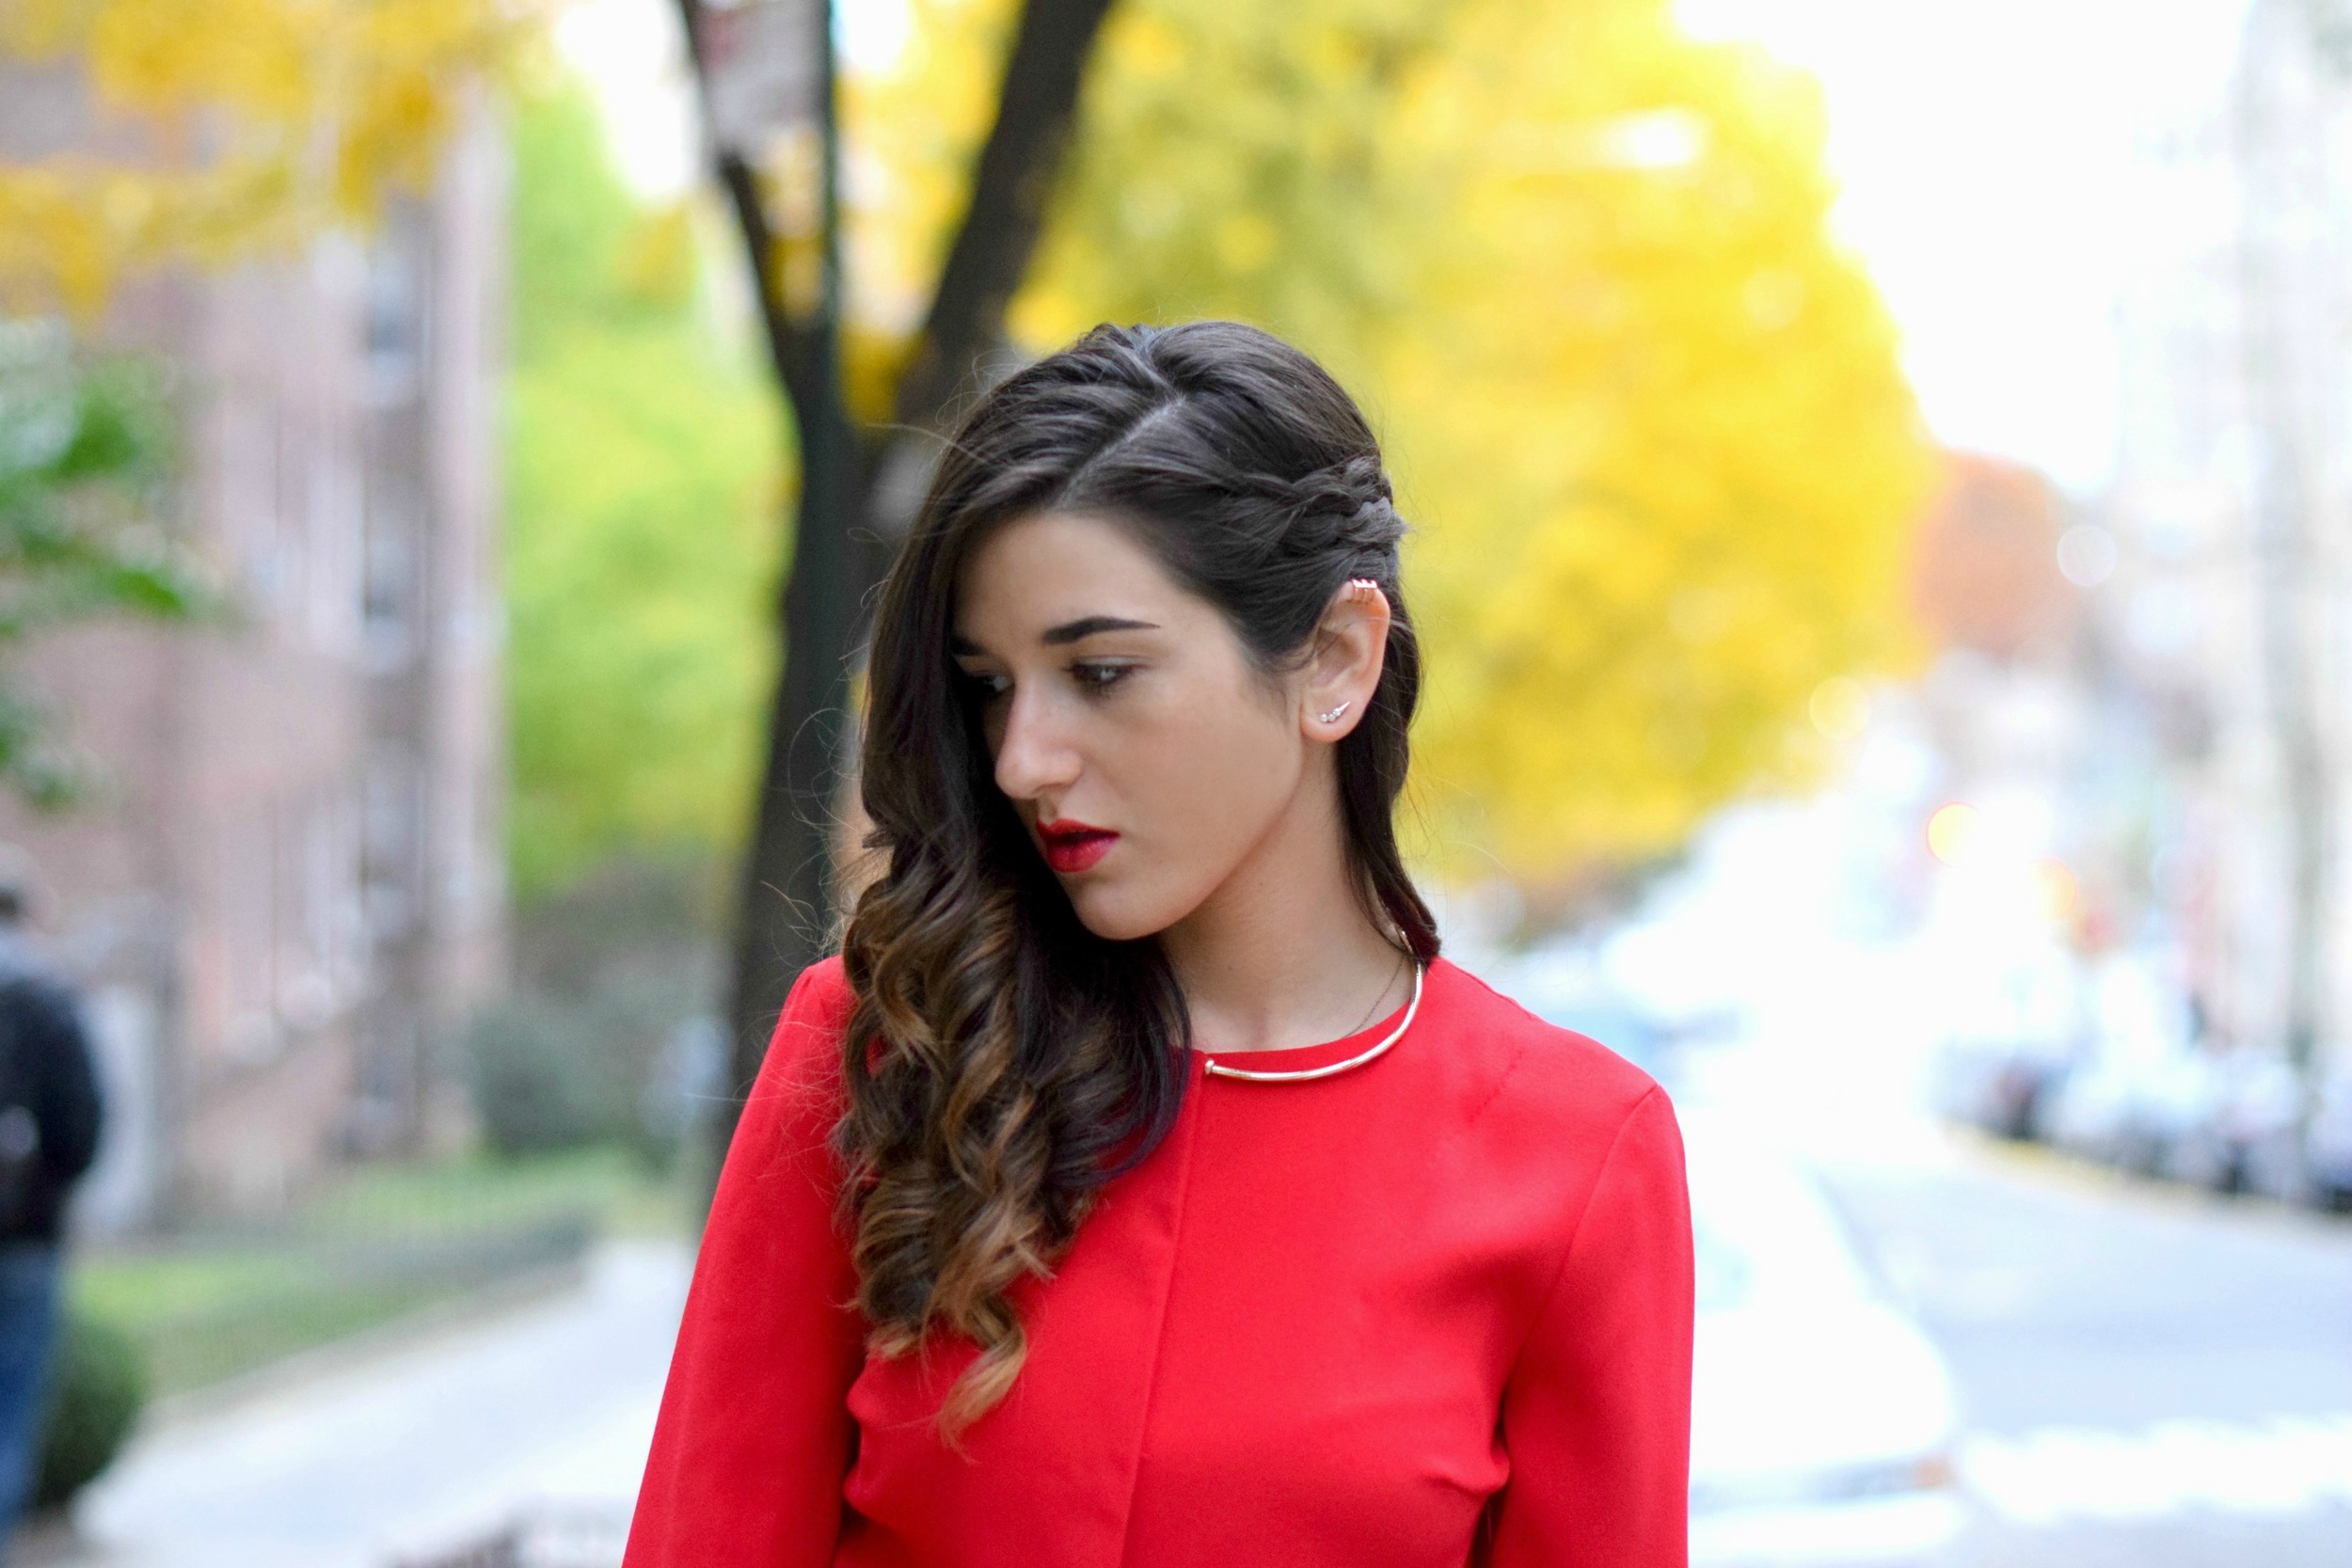 Red Romper Black Tights Louboutins & Love Fashion Blog Esther Santer NYC Street Style Blogger Winter Fall Look Shoes Heels Zara Gold Collar Necklace Braid Hair Inspo Outfit OOTD Photoshoot NYC Girl Women Model Stiletto Shop Wear Accessories Clothing.jpg